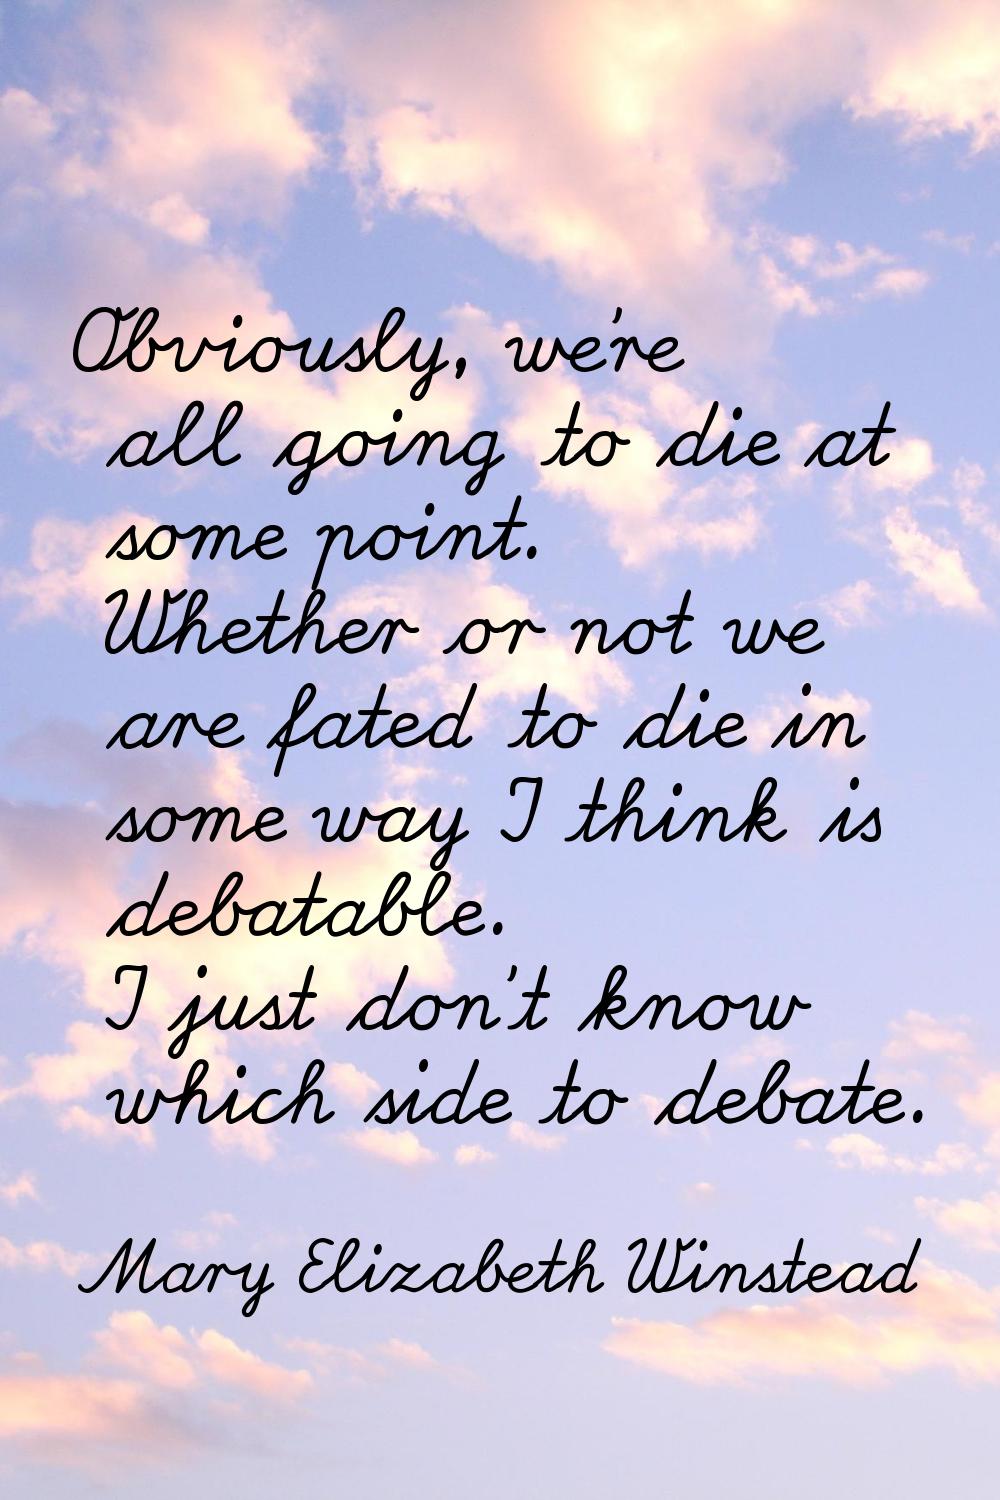 Obviously, we're all going to die at some point. Whether or not we are fated to die in some way I t